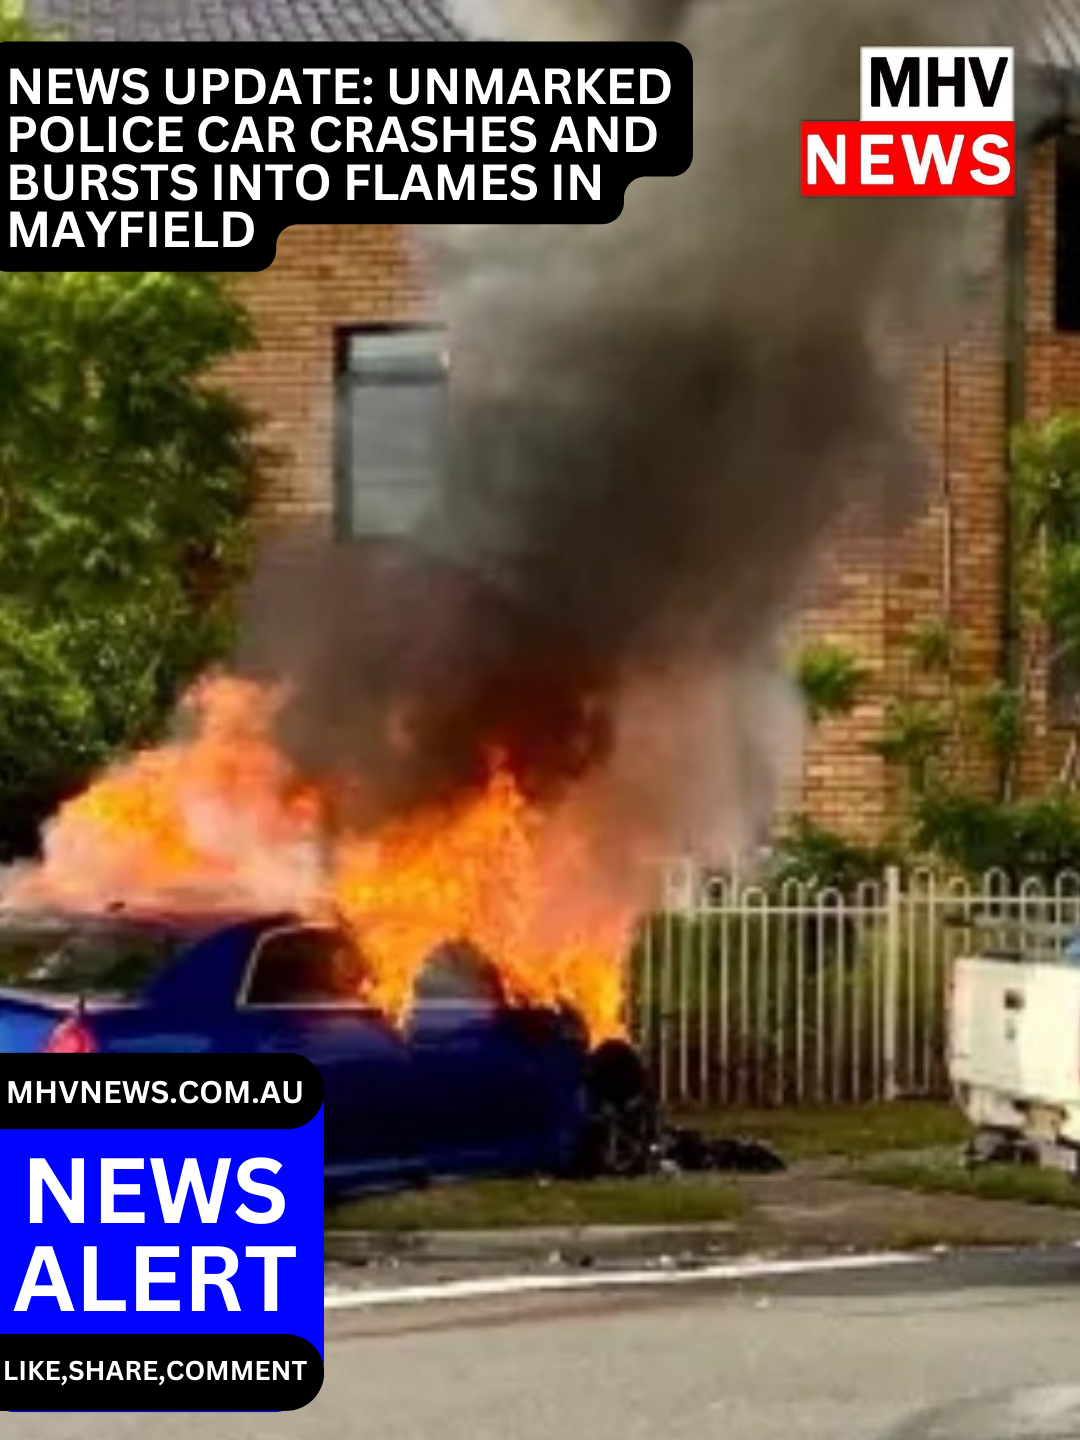 You are currently viewing News Update: Unmarked Police Car Crashes and Bursts into Flames in Mayfield